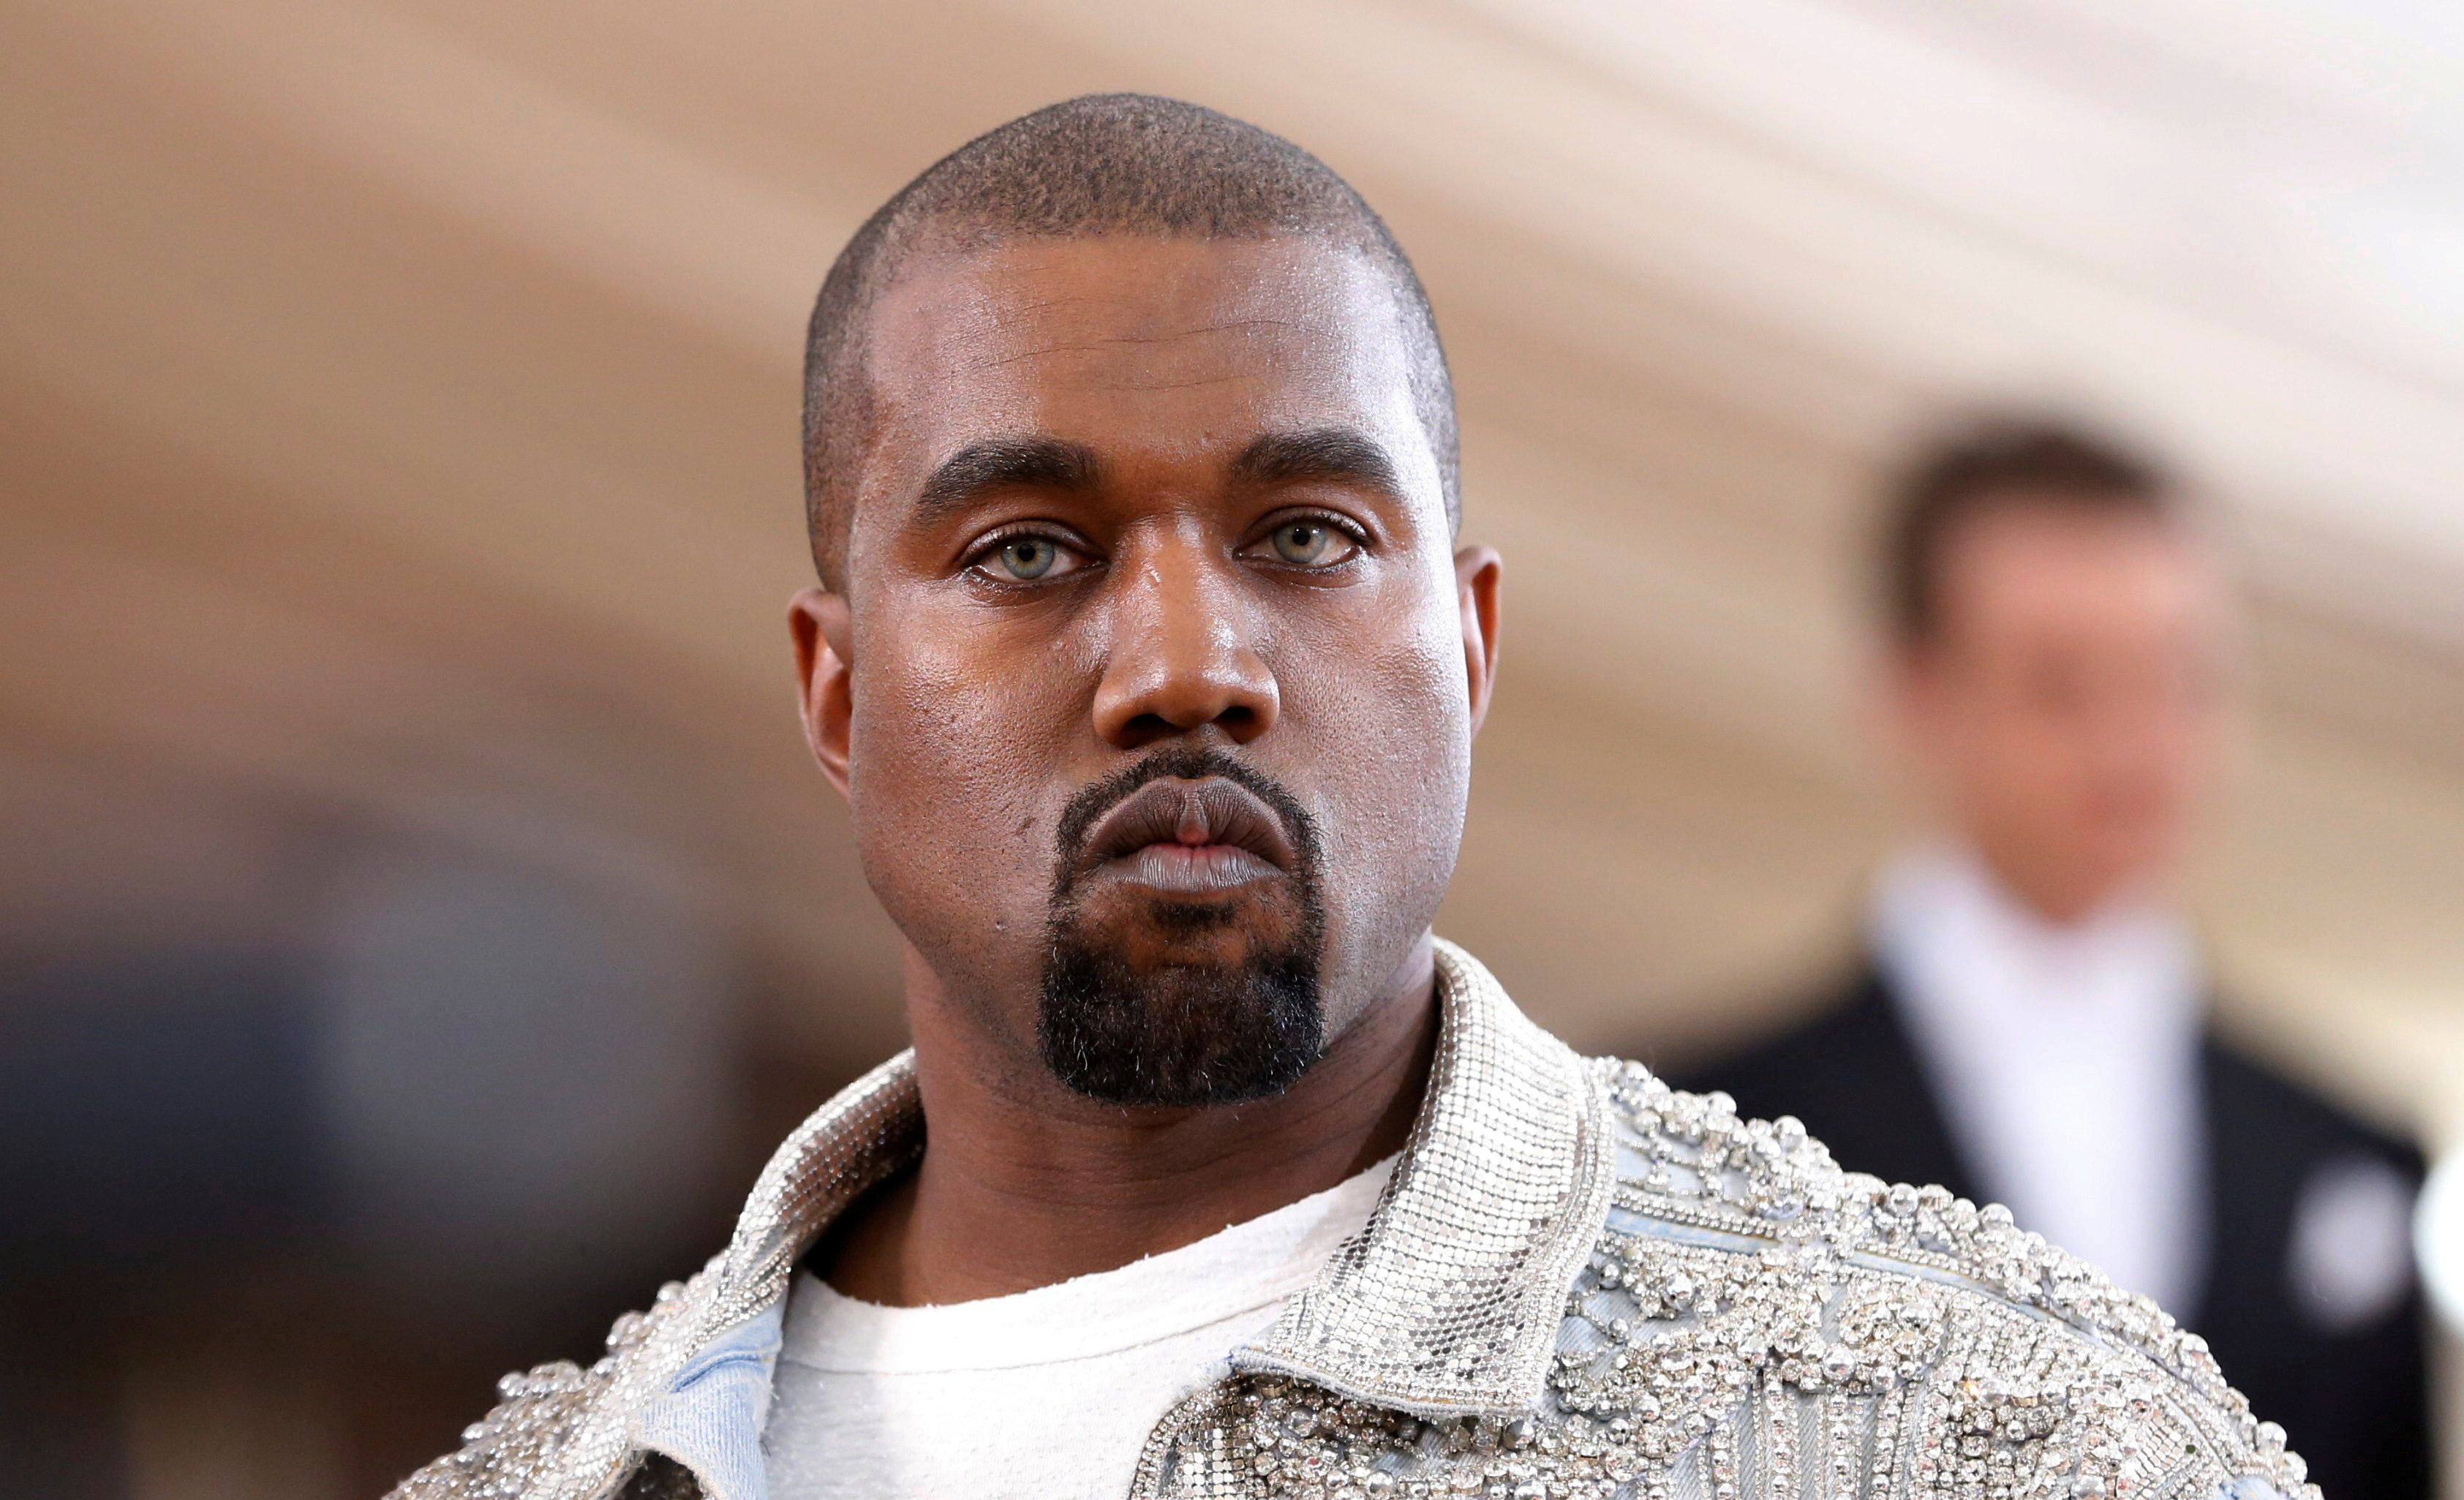 Entertainer and businessman Kanye West is worth an estimated US$6.6 billion according to Bloomberg. Photo: Reuters